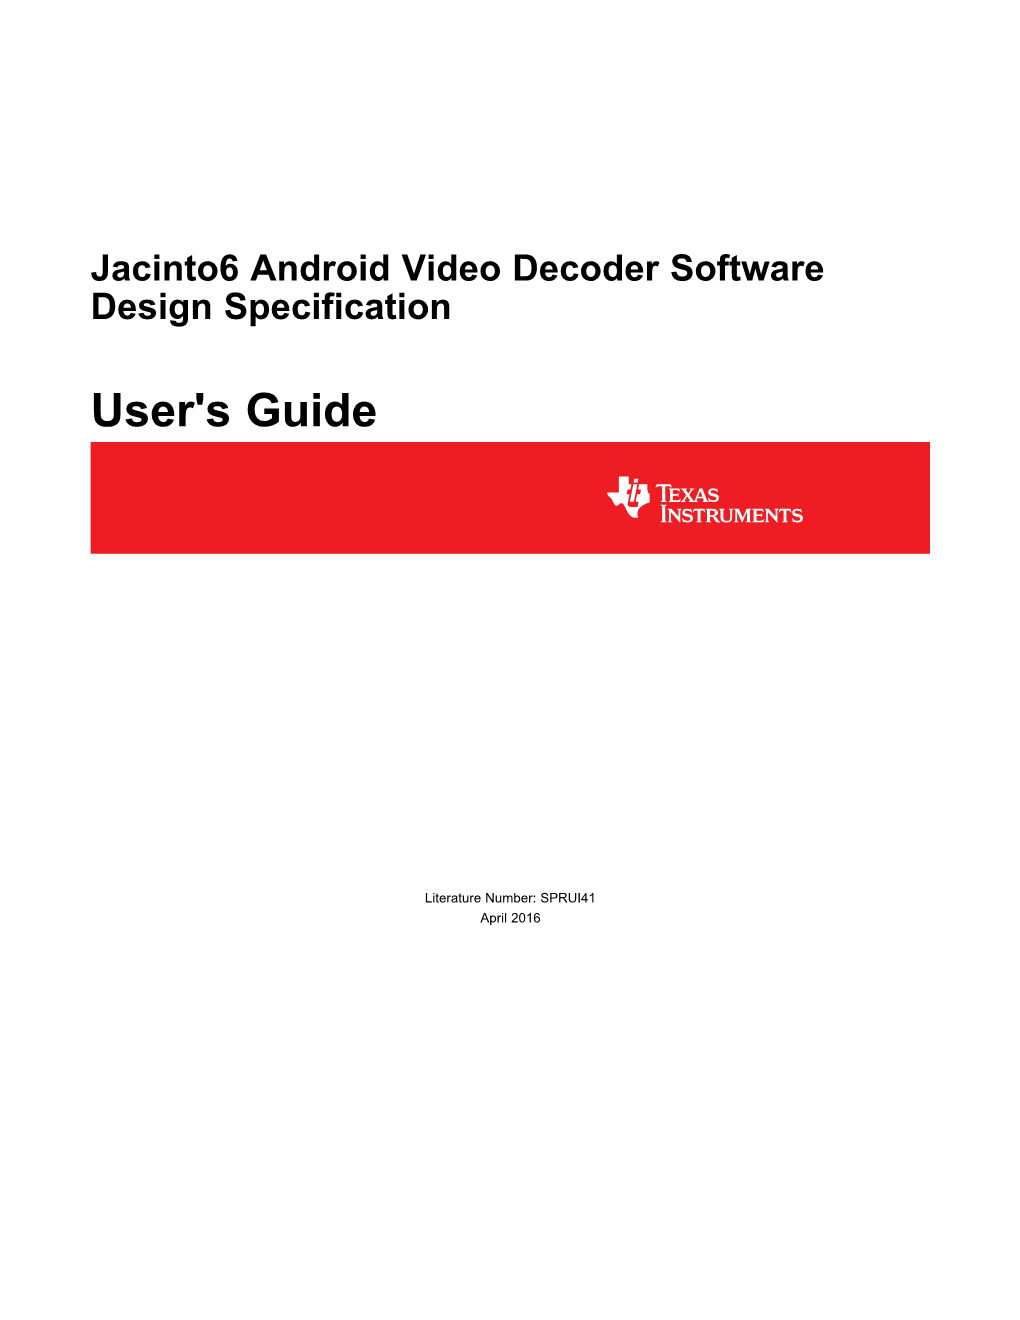 Jacinto6 Android Video Decoder Software Design Specification